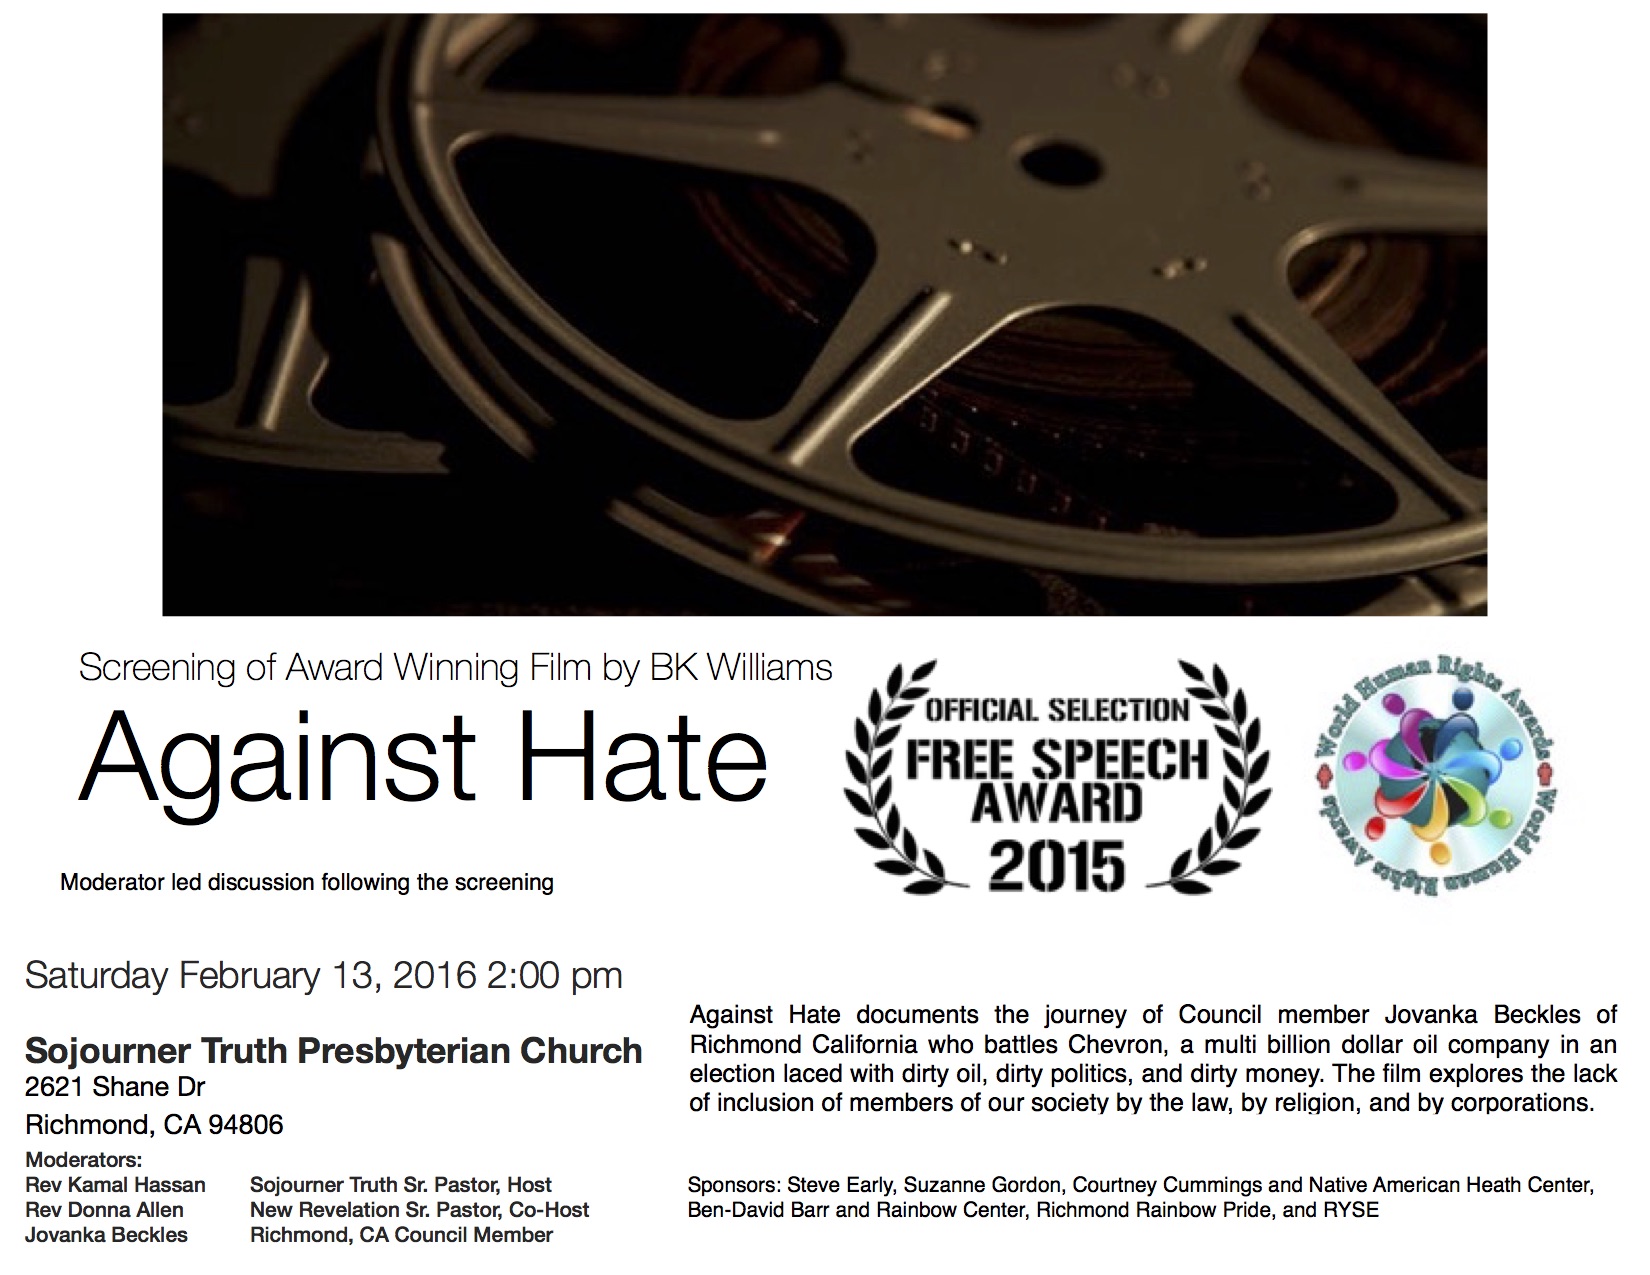 The film “Against Hate” screens on February 13th at 2:00 pm.